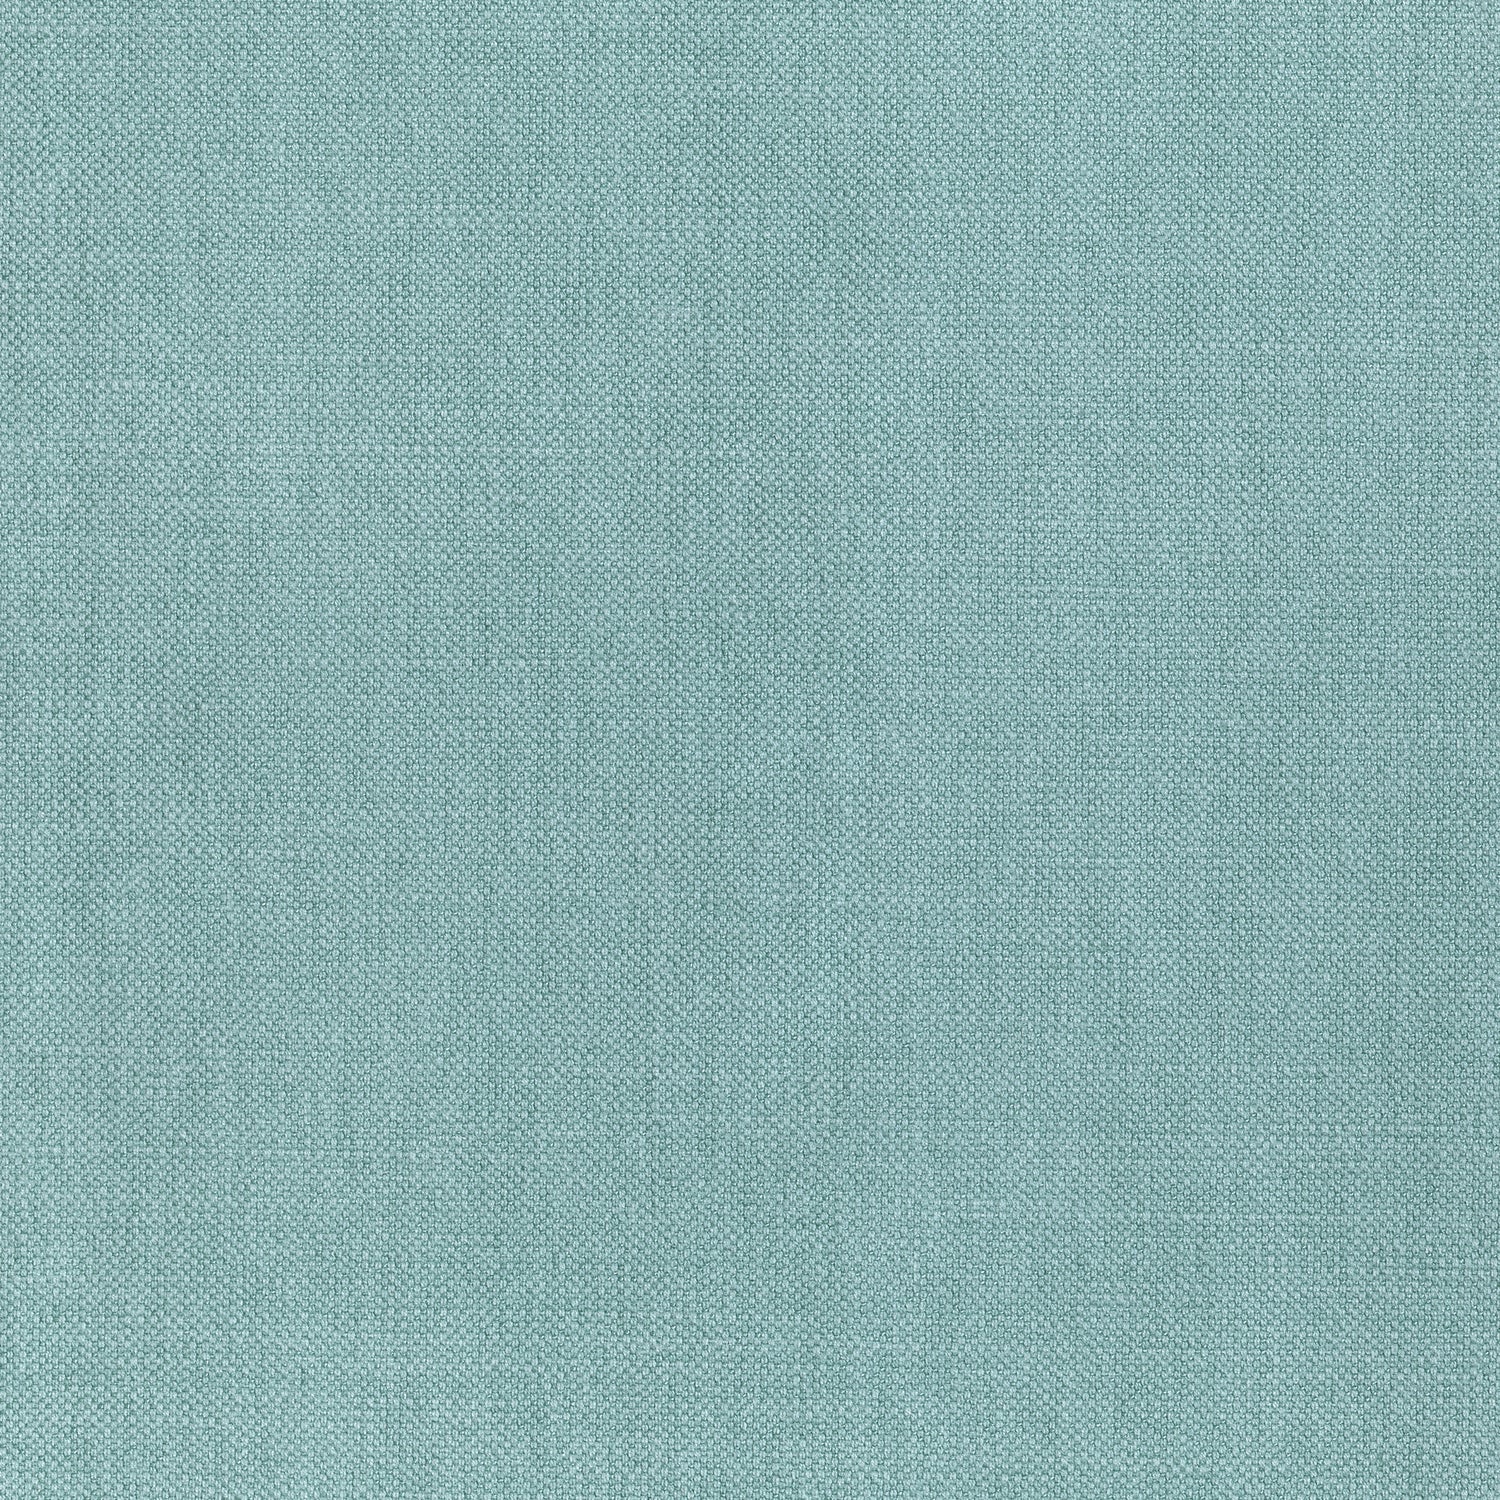 Prisma fabric in pool color - pattern number W70146 - by Thibaut in the Woven Resource Vol 12 Prisma Fabrics collection